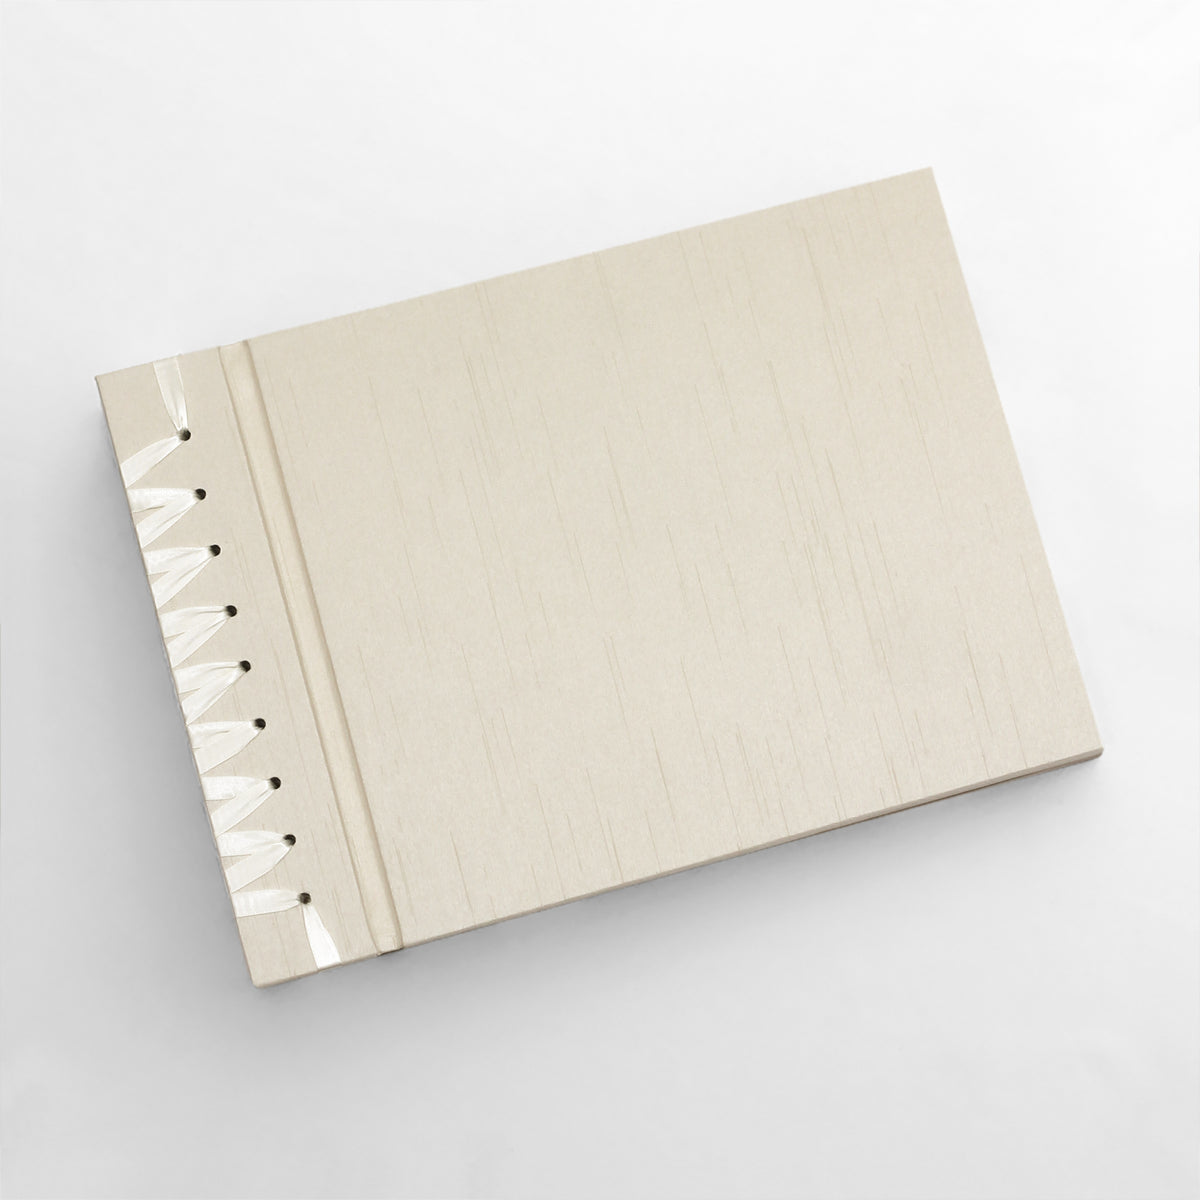 Large 10 x 15 Paper Page Album | Cover: Champagne Silk | Available Personalized